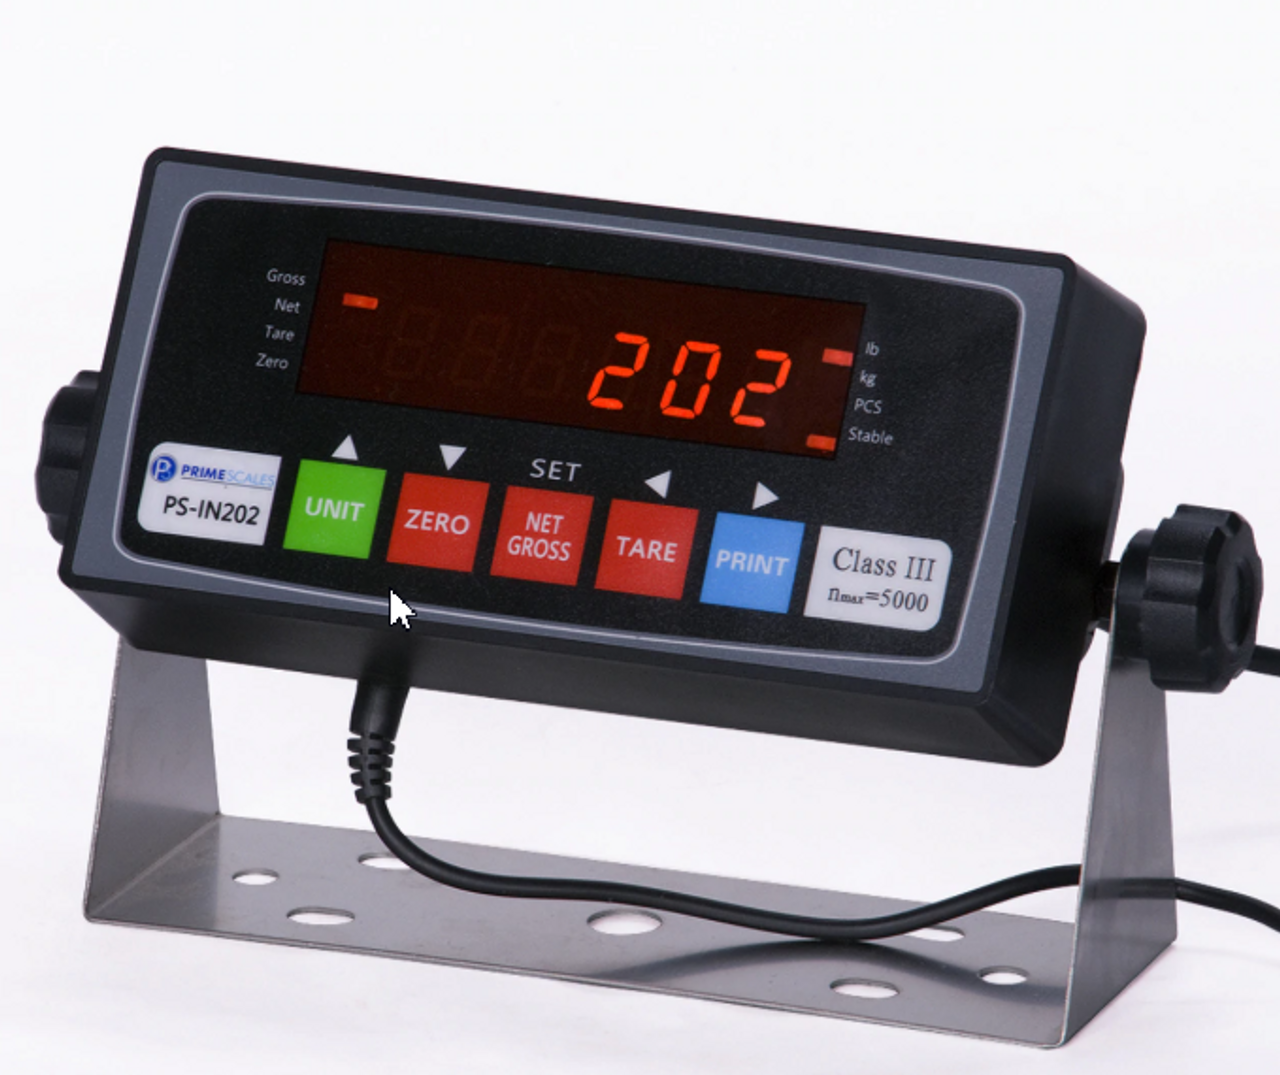 Prime Scales Calibration & Trouble shooting videos